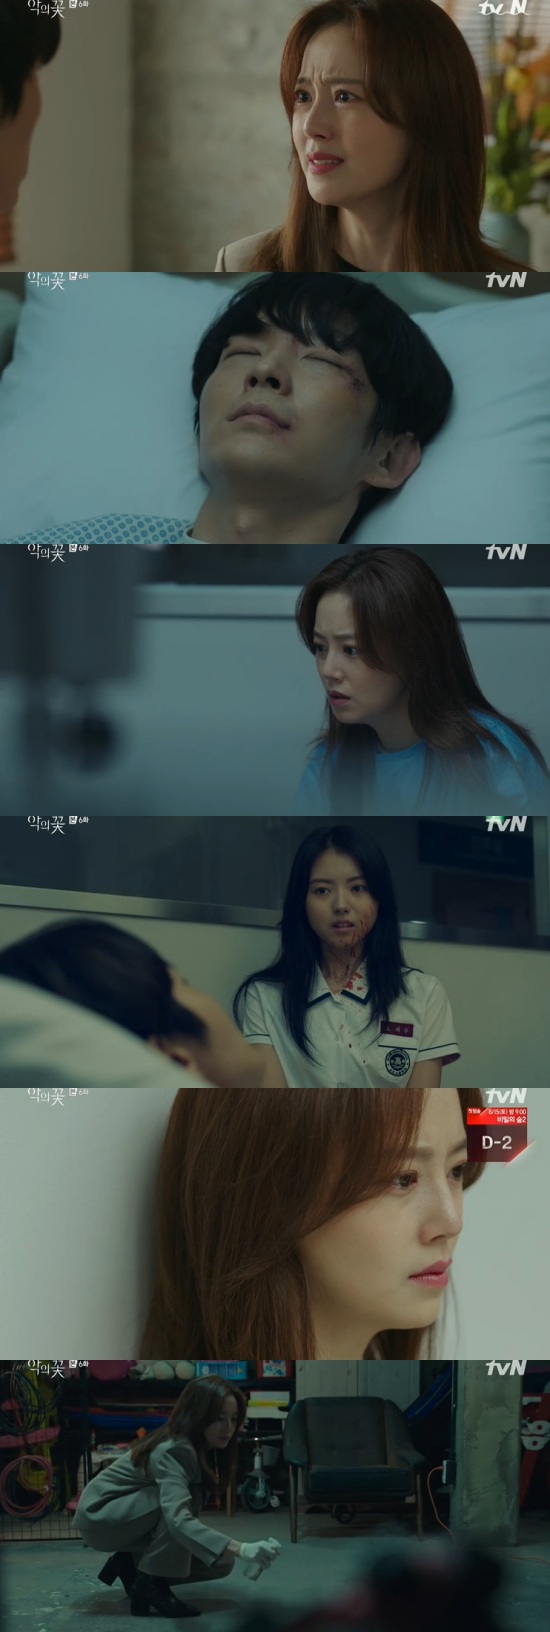 Will Moon Chae-won notice Lee Joon-gis identity?In the 6th episode of tvNs Flower of Evil broadcast on the 13th, Cha JiWon (Moon Chae-won) was portrayed as suspicious of Baek Hee-seong (Lee Joon-gi).On that day, Baek Hee-seong was kidnapped by Park Kyongchun (Yoon Byung-hee), and Cha JiWon rescued Baek Hee-seong, just before drowning, and moved him to the hospital.Fortunately, Baek Hee-seong regained consciousness after 10 days.Cha JiWon then went home to Baek Hee-seong and told him to rest, and said, You almost died in front of me, thats only ten days ago.You know how I felt when you were wandering around for 10 days. Furthermore, Cha JiWon said, When Im outside the hospital, my legs are shaking when I call, why are you looking for me, why are you looking for me so urgently? Go home and sleep comfortably?Every time I enter a house without anyone, I will really be alone in this house. Do you know how scared I was? Especially Cha JiWon said, You never know what hell Ive been through for ten days, but youve been... What the hell are you? What?Cha JiWon suddenly went out of the room, saying he was tired, when Cha JiWon recalled what Baek Hee-seong had said before he completely regained consciousness.At the time, Baek Hee-seong mistook Cha JiWon for a young Do Hae-su (Im Na-young), and confessed, My sister lives normal; I never live as Do Hyun-soo.Eventually Cha JiWon noticed that Baek Hee-seong was Do Hyun-soo (Lee Joon-gi).Cha JiWon entered the workshop basement of Baek Hee-seong after breaking the lock.Cha JiWon infiltrated the workshop basement in Caught in the Web, while Baek Hee-seong infiltrated Park Kyungchuns ward with the help of a million-woo (Son Jong-hak).Park Kyungchun was waiting for the Baek Hee-seong, and until the end he questioned where Jung Mi-sooks body was; Baek Hee-seong said, I am the same.I saw the TV and I knew. That my father was a serial killer. Is that hard to believe? he shot back.I have an mystery, how did it feel when I found out that Jung Mi-sook was dead, Baek Hee-seong asked before killing Park Kyongchun.Park Kyoungchun said, Is that curious? Why is it really curious?What I asked you last time. Fish cell phone ring. Someone came to the funeral home and gave it to you. I got it. Who.Why? I testified to my fathers alibi at the same time as a witness. What if both the witness and I told the truth?Baek Hee-seong revealed that he left Park Kyongchun alive and did not talk about himself.However, Cha JiWon met Nam Soon-gil (Lee Kyu-bok)s wife, and Nam Soon-gils wife handed Do Hyun-soos bag.Cha JiWon declared that he would arrest Do Hyun-soo, raising tension in the drama.Photo = TVN broadcast screen